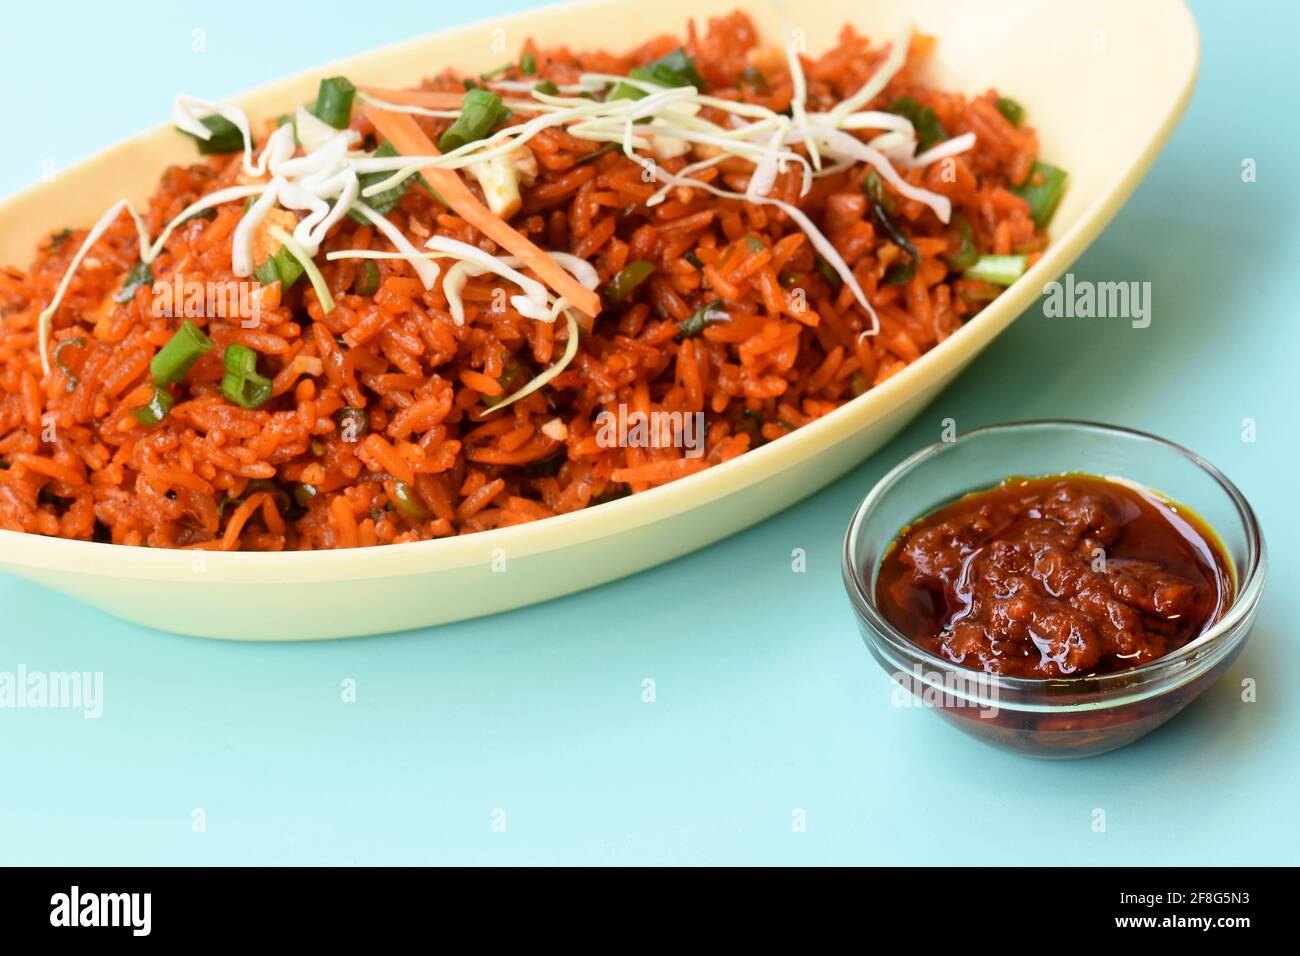 Schezwan fried rice with schezwan sauce, Chinese fried rice, garnished with spring onion and cabbage indo chinese cuisine dishes Stock Photo